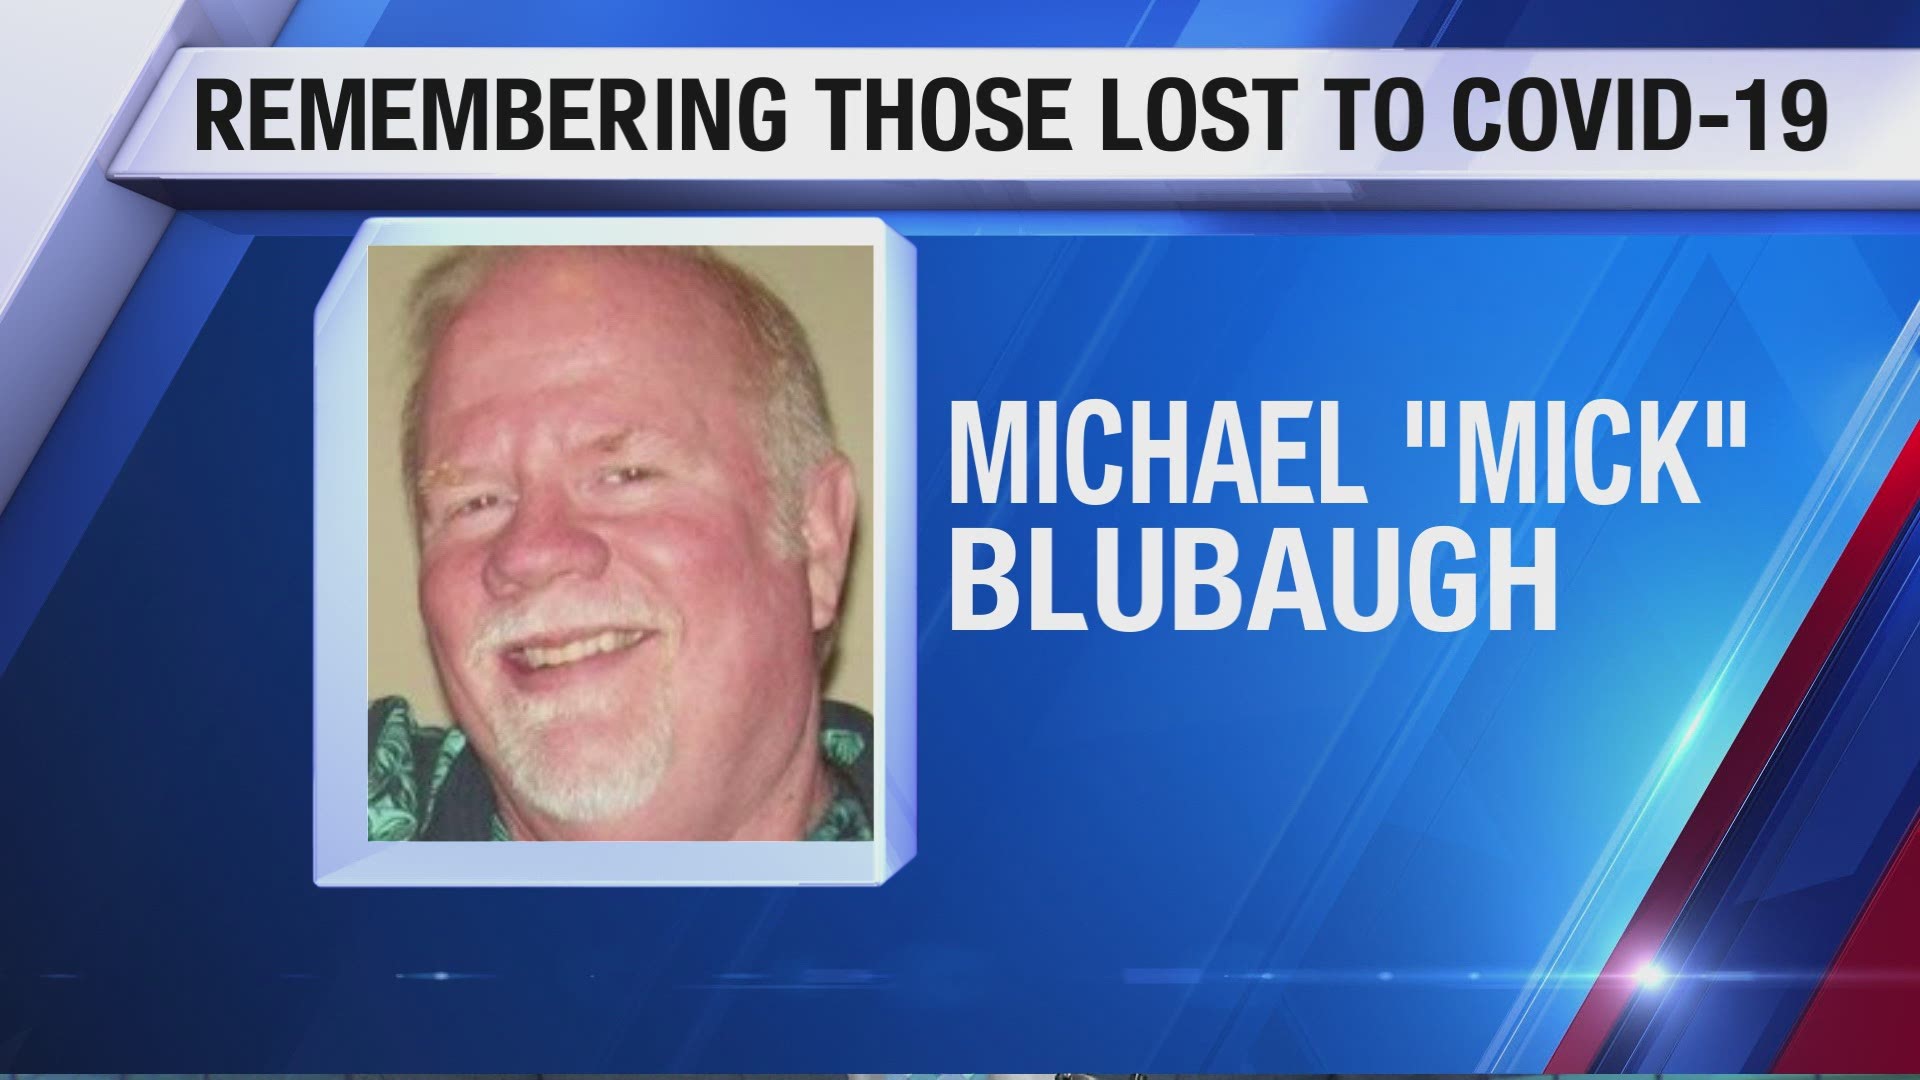 Michael "Mick" Blubaugh died on May 11 after his week-long battle with the virus, according to the Des Moines Register.